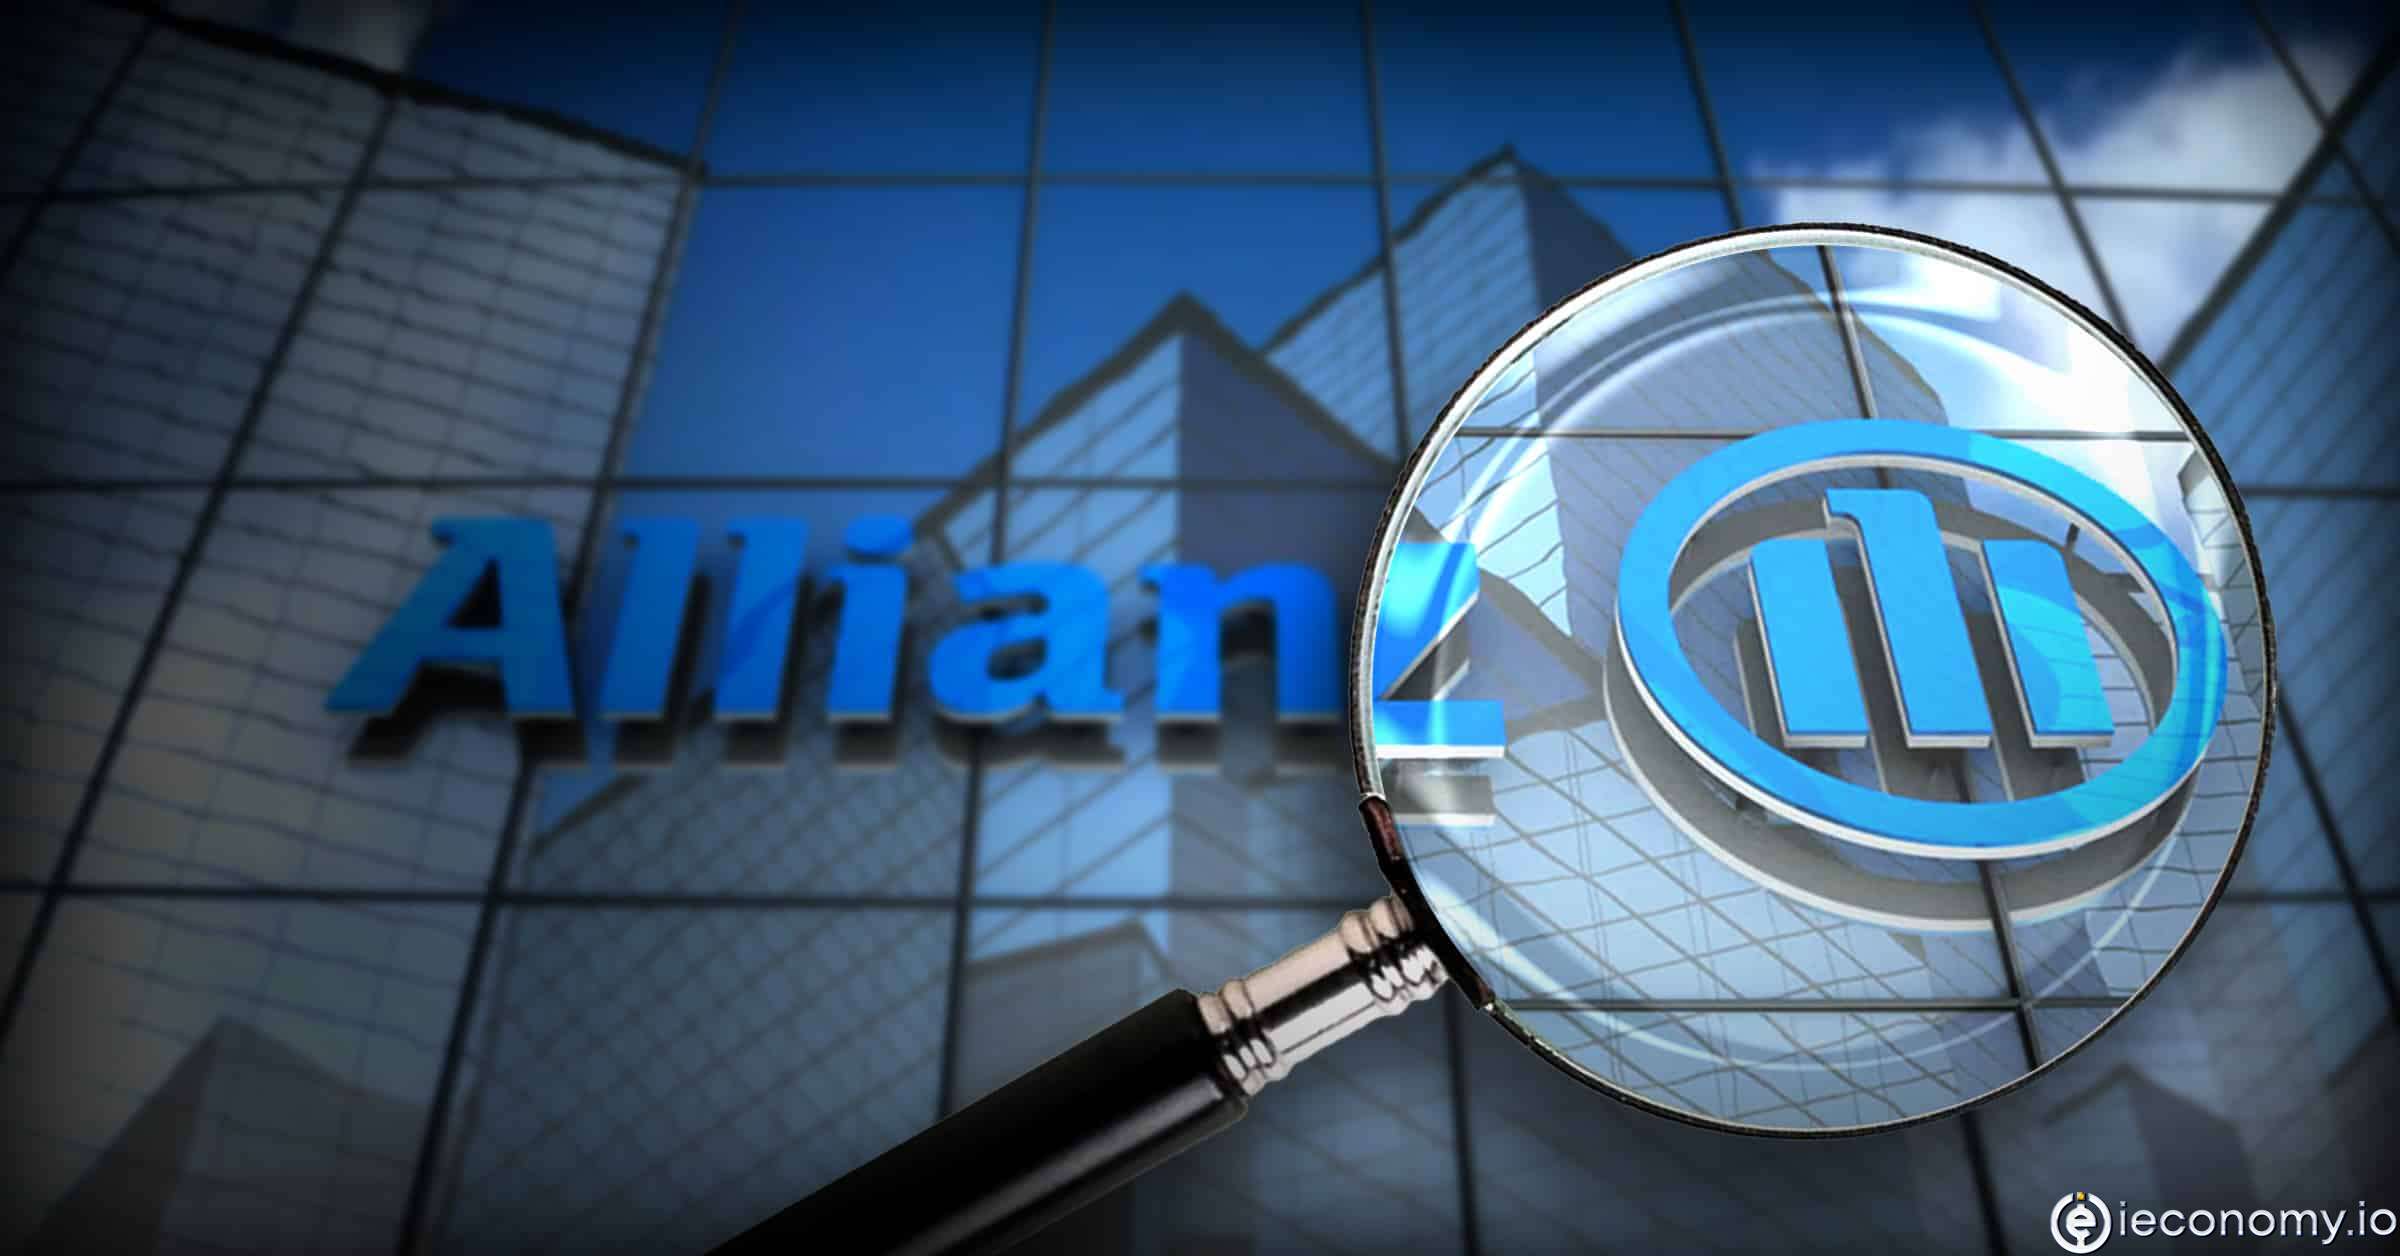 In the US, Allianz is grappling with an investigation